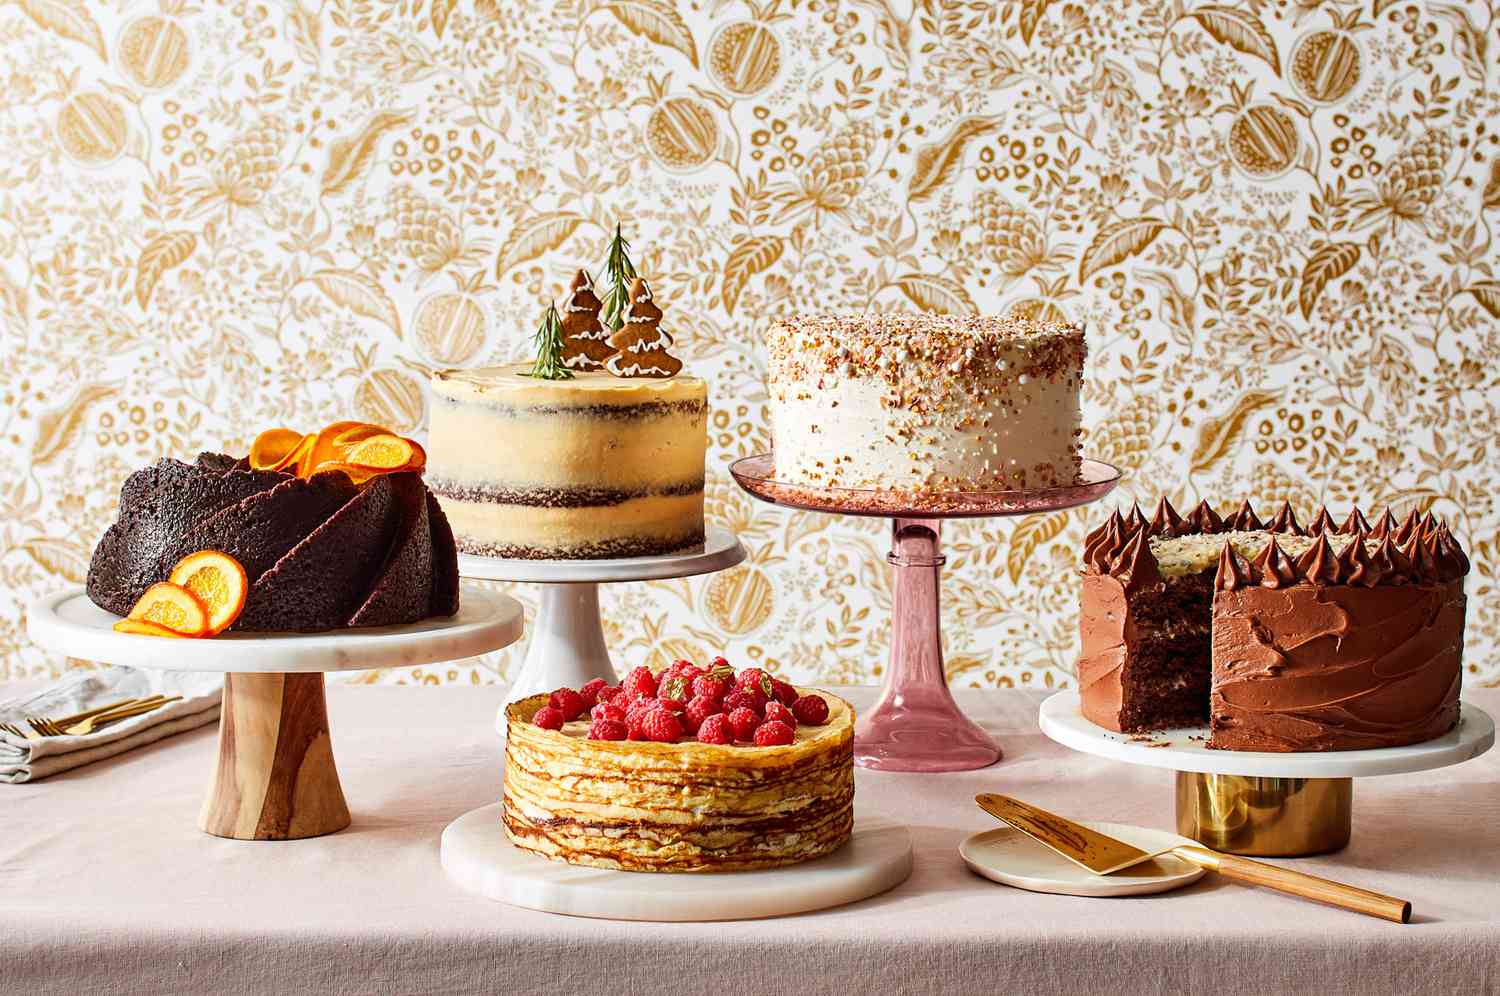 Meet Five Midwest Cake Creators (and Try Their Recipes)